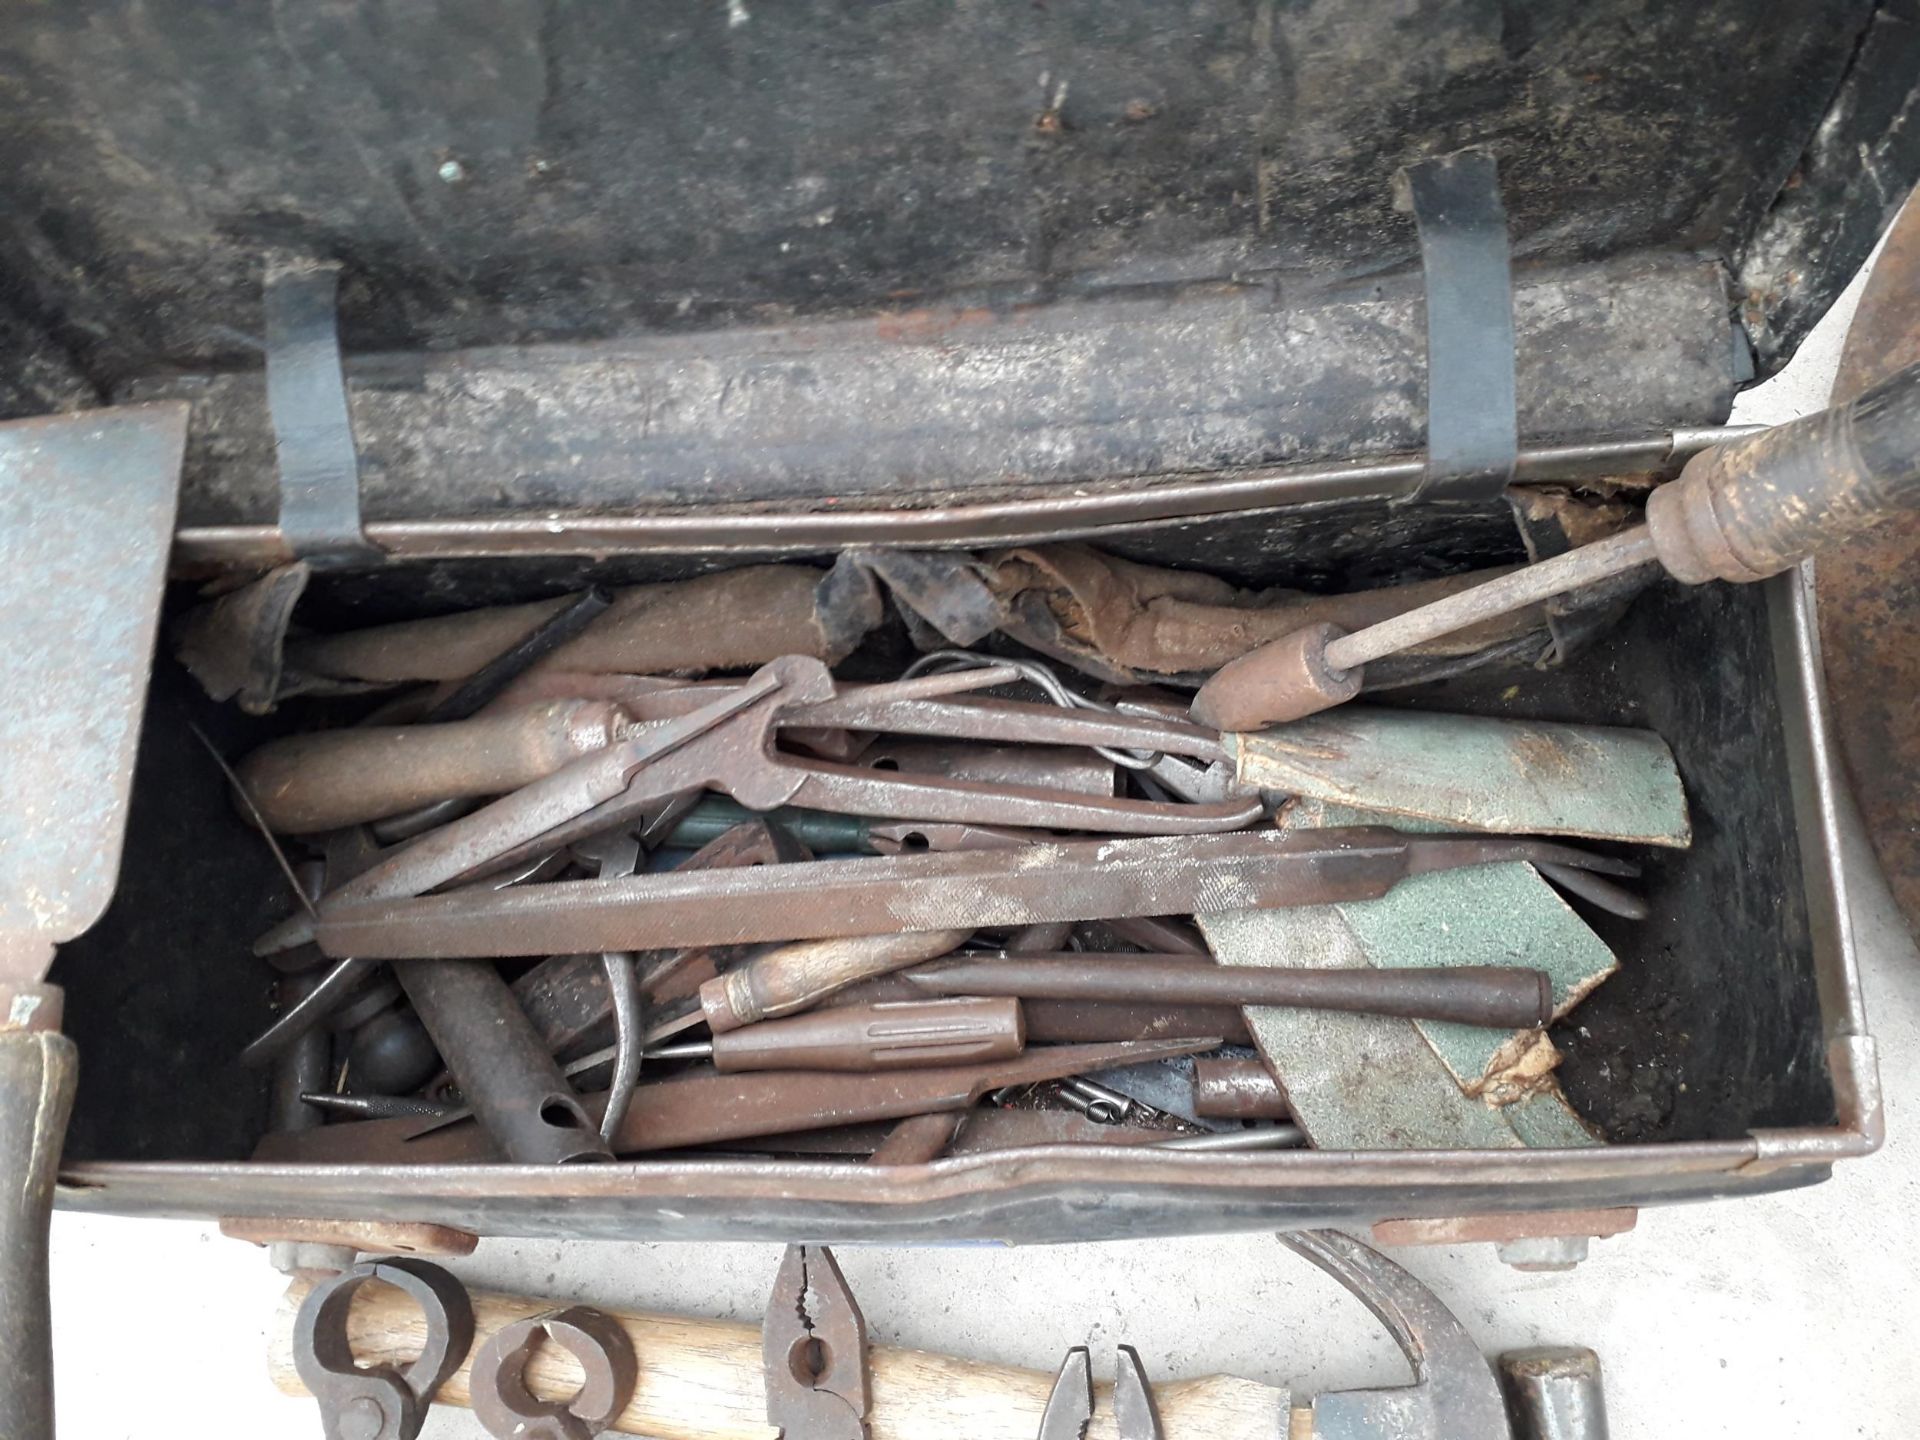 A TOOL BAG CONTAINING VARIOUS HAMMERS, SPANNERS, ETC - Image 2 of 3